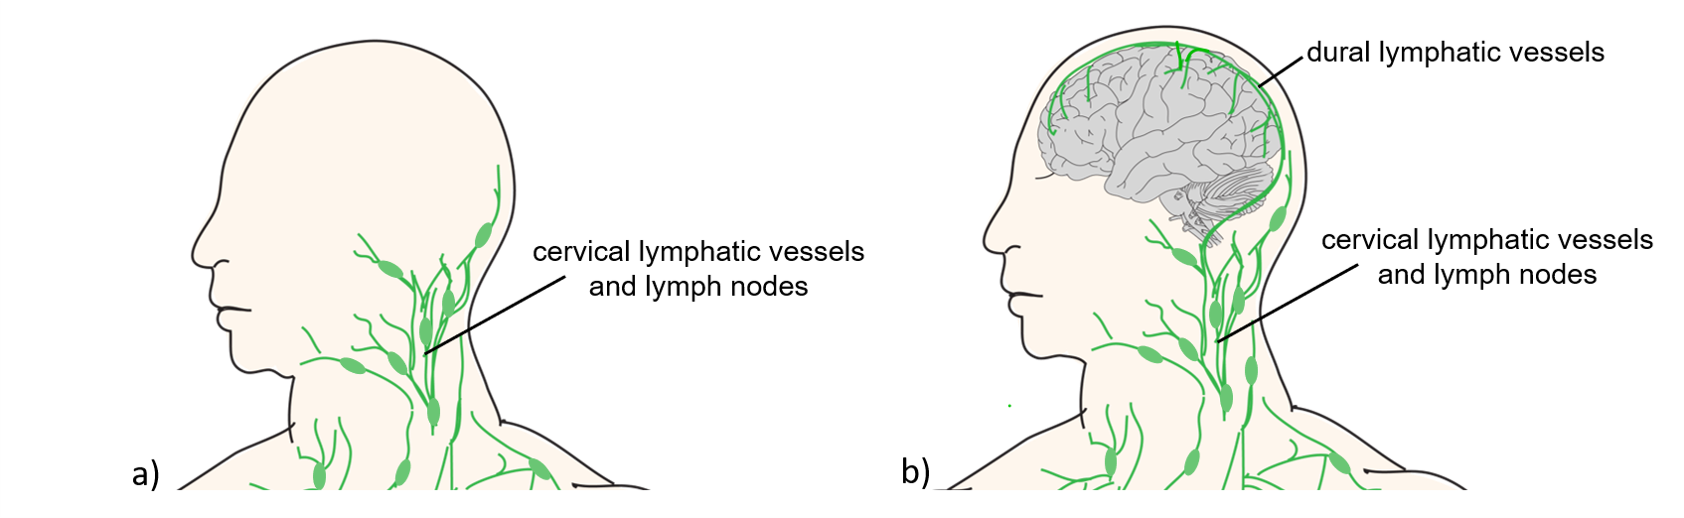 Comparison of lymphatic vessel diagrams before and after the discovery of dural lymphatic vessels.